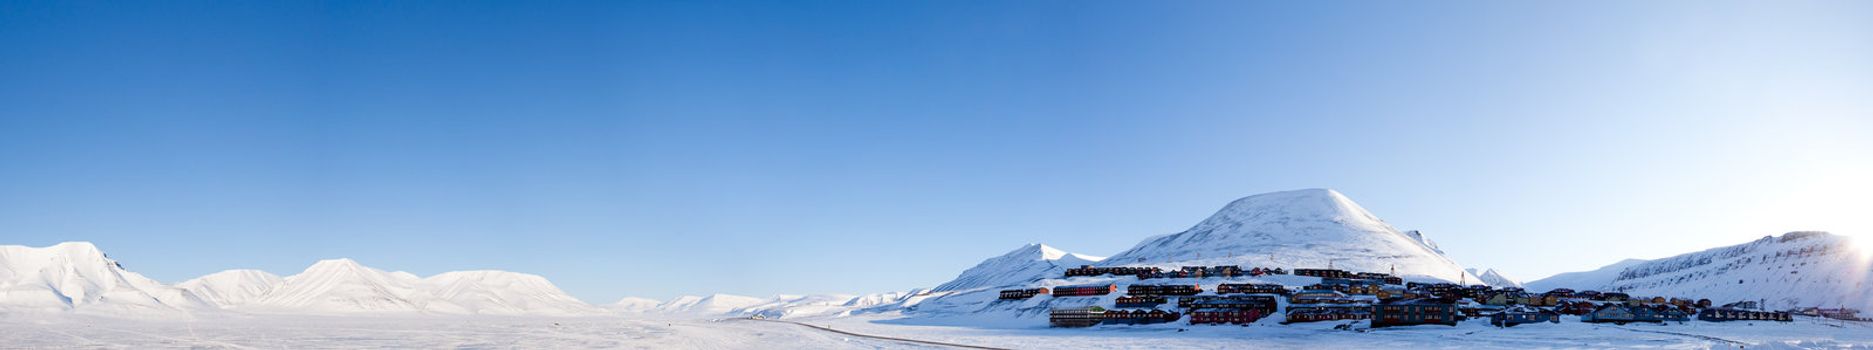 A panorama of Longyearbyen on the island of Spitsbergen, Norway.  The northern most town in the world.